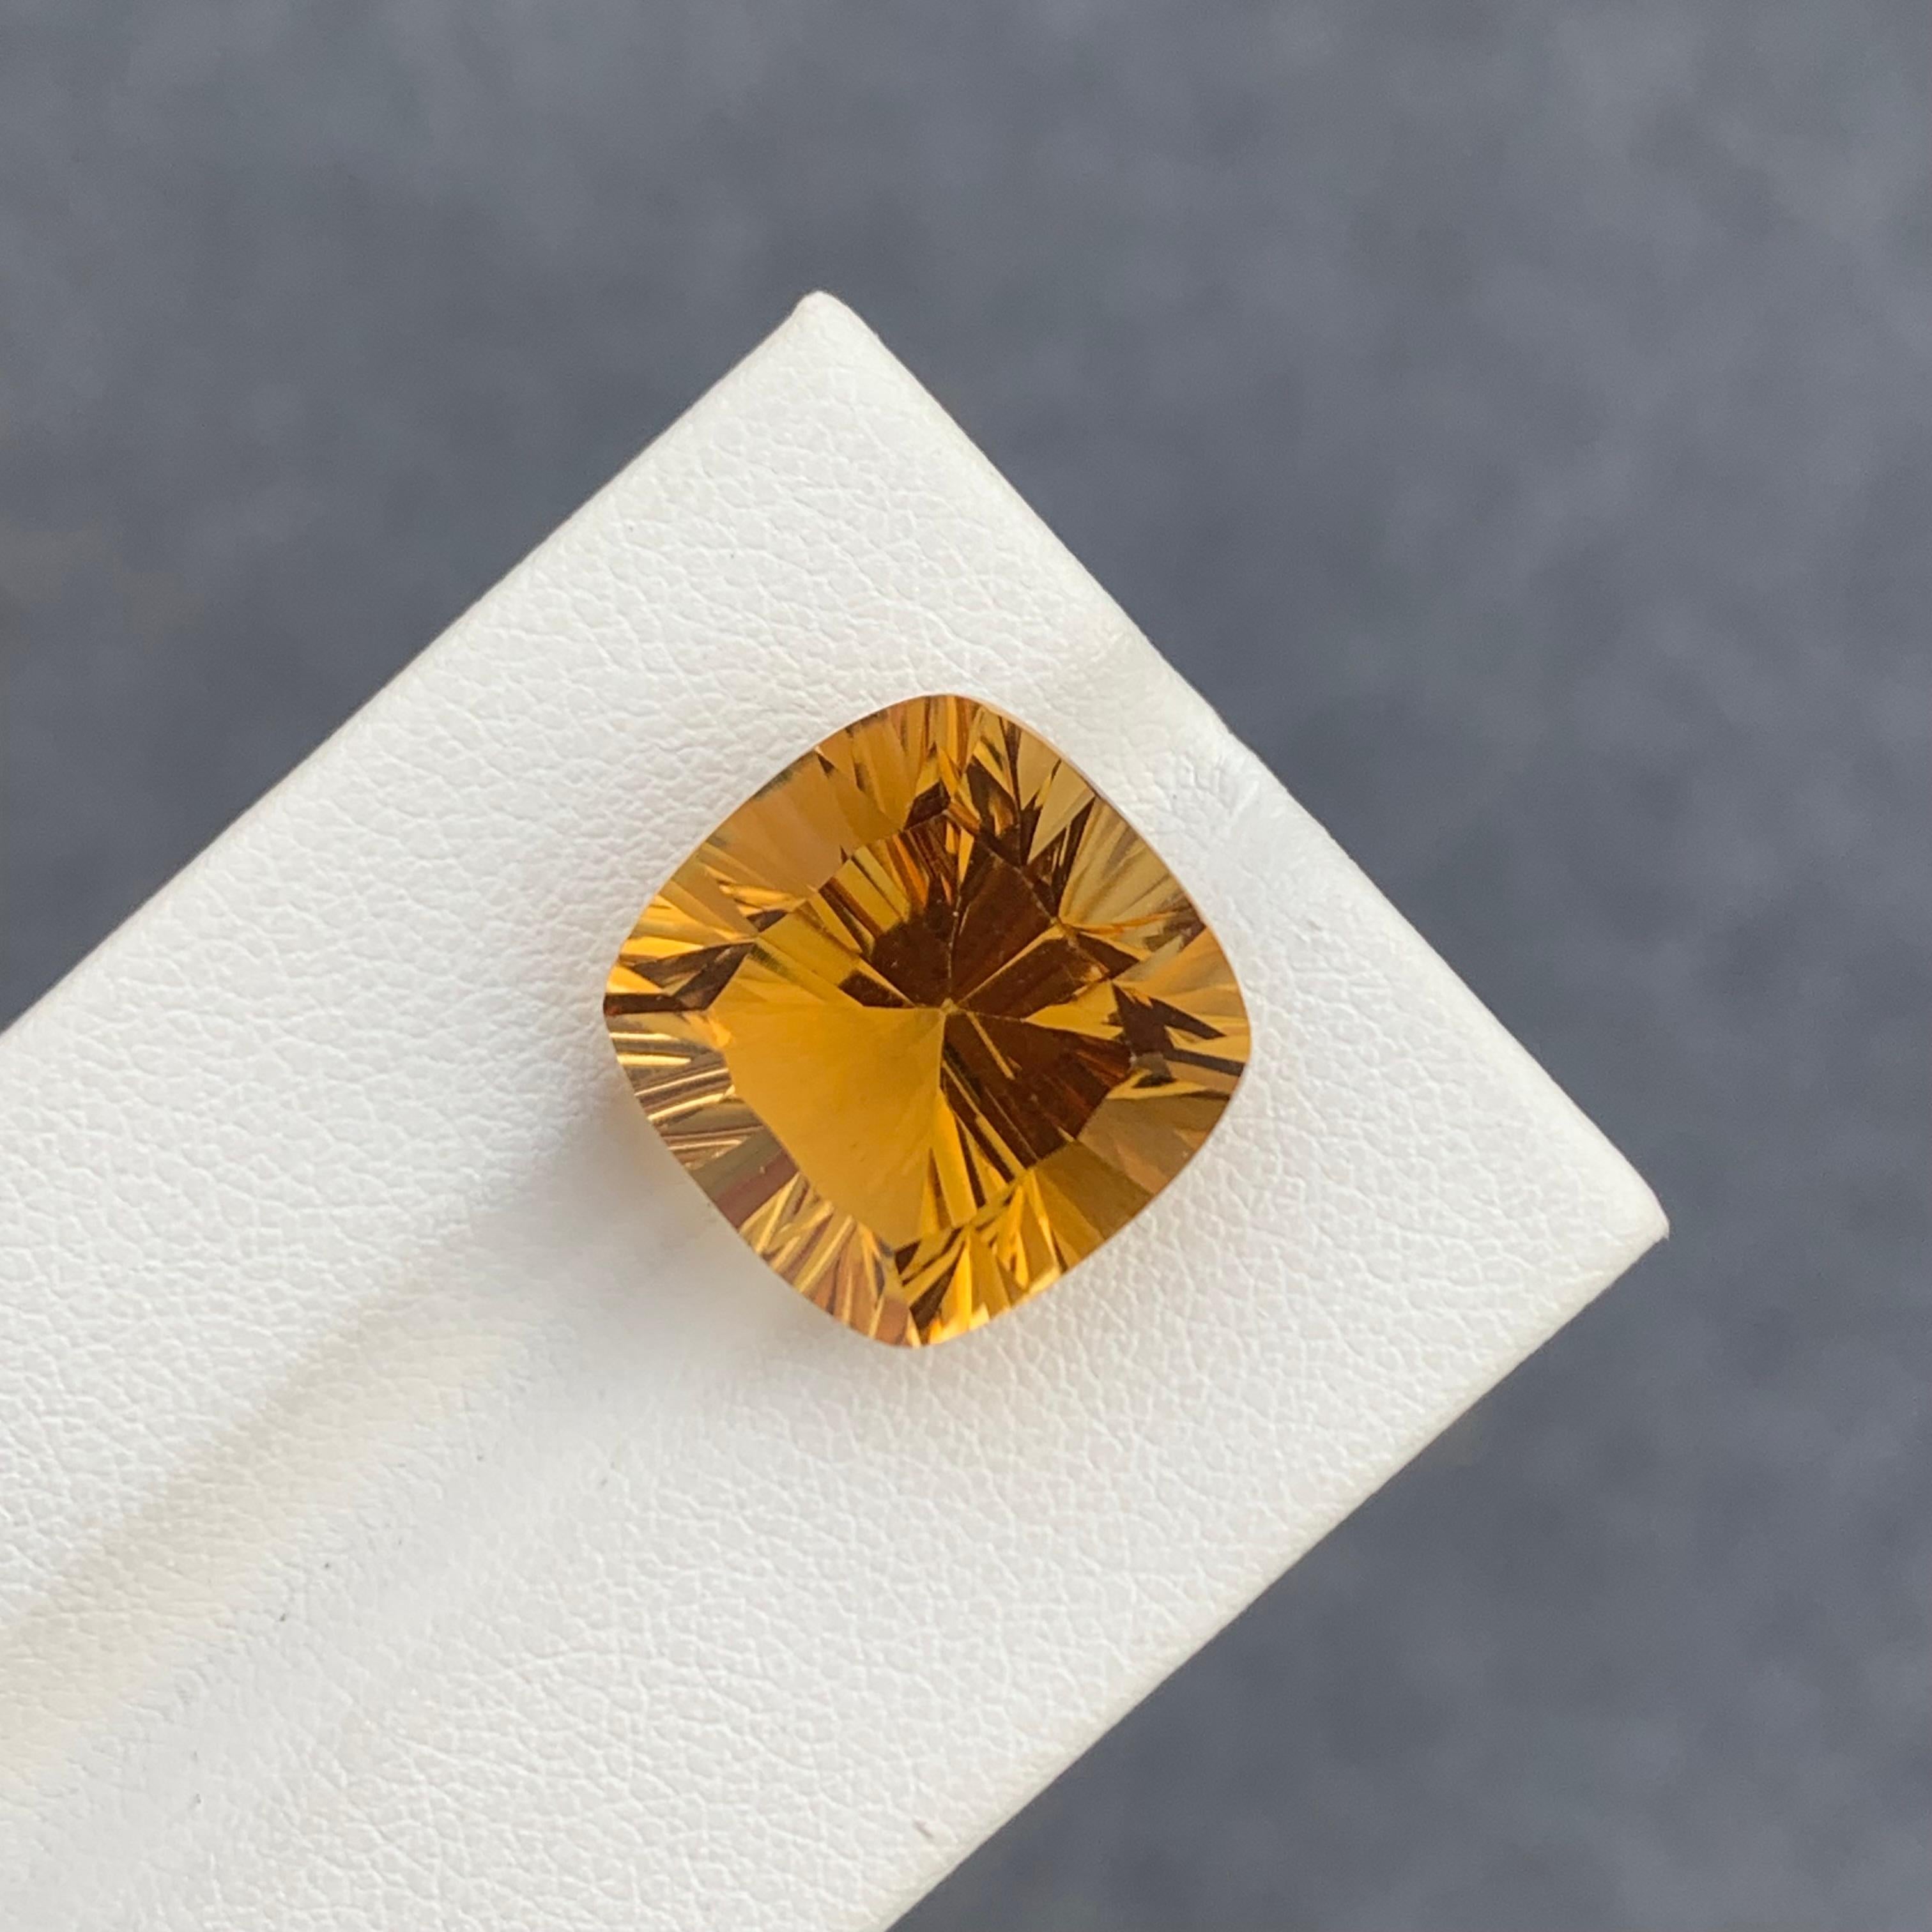 Loose Citrine
Weight: 14.90 Carats
Dimension: 14.9 x 14.9 x 11.2 Mm
Origin: Brazil
Colour: Yellow
Treatment: Non
Certficate: On Demand
Shape: Square 


Citrine, a radiant and versatile gemstone, enchants with its warm, golden hues and remarkable